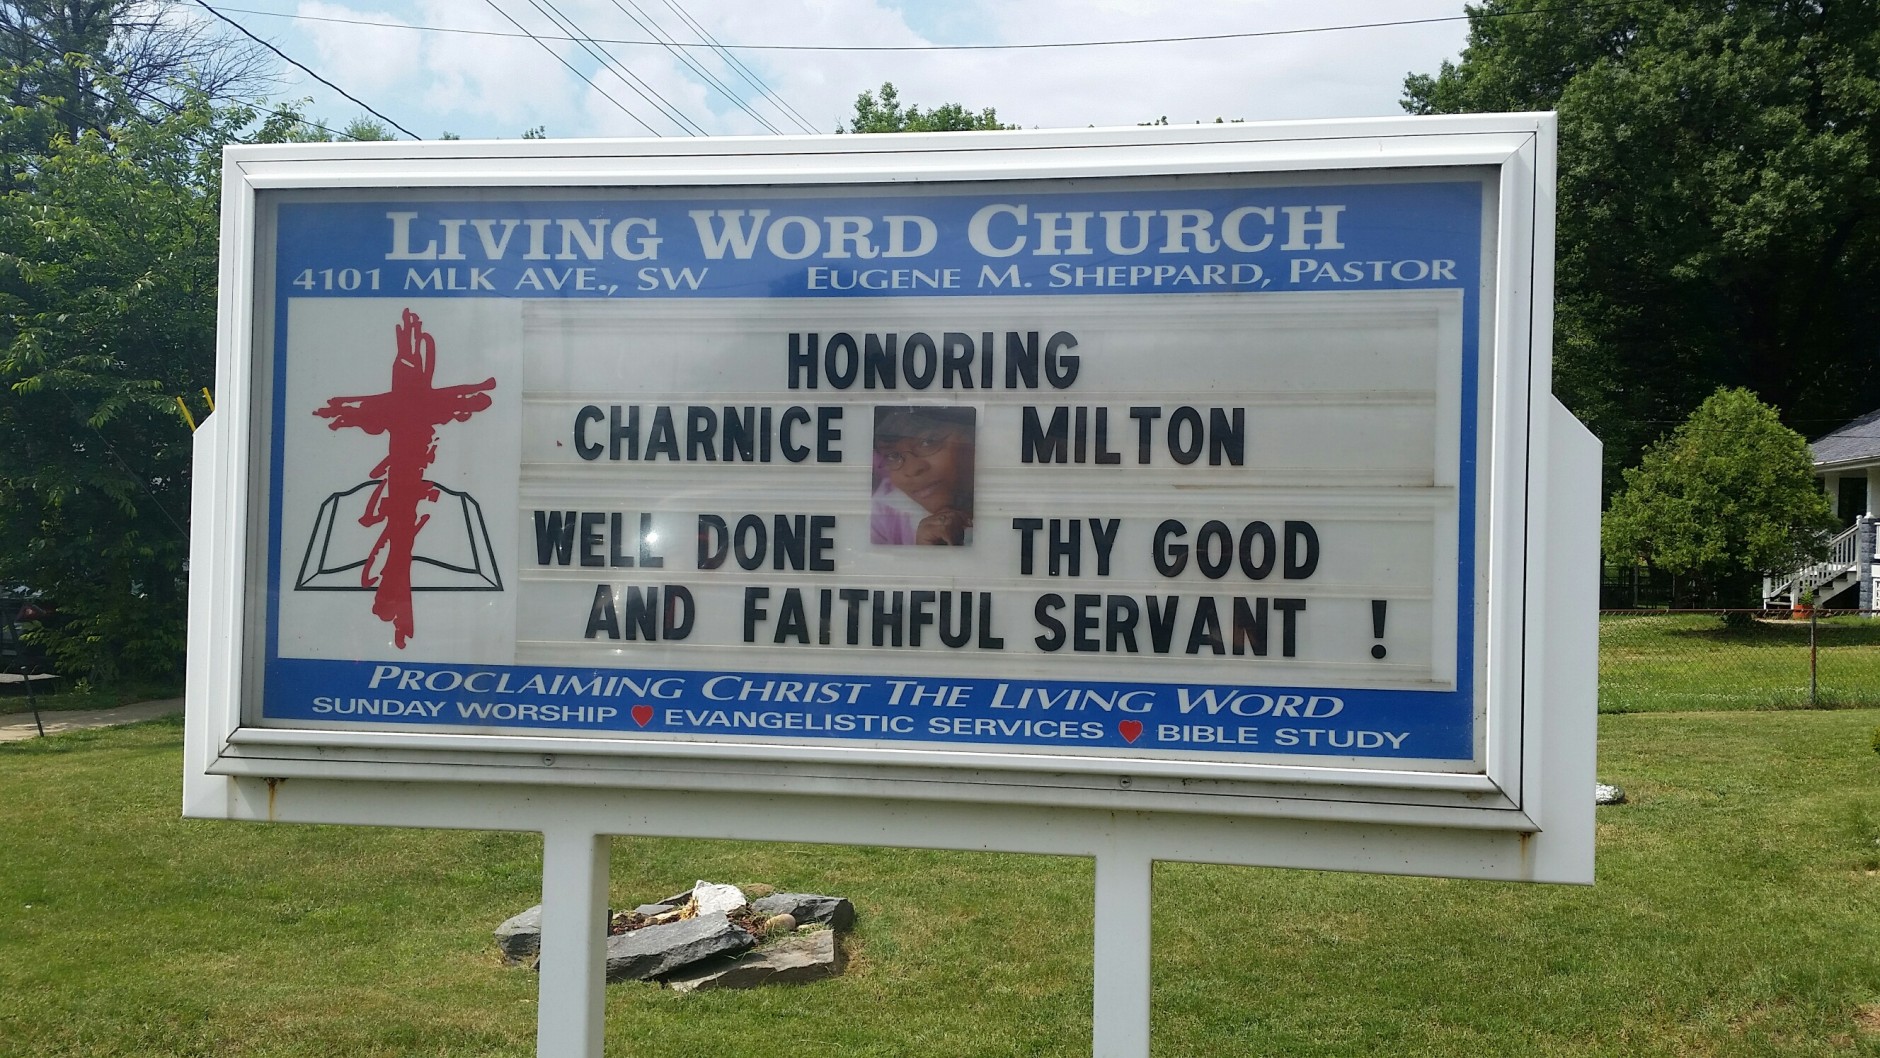 On Saturday, a funeral was held for a local community reporter who was gunned down on the streets of D.C. 27 year-old Charnice Milton was being used as a human shield when she was shot and killed in Southeast on the night of May 27 while returning home from covering a story. (WTOP/Kathy Stewart)